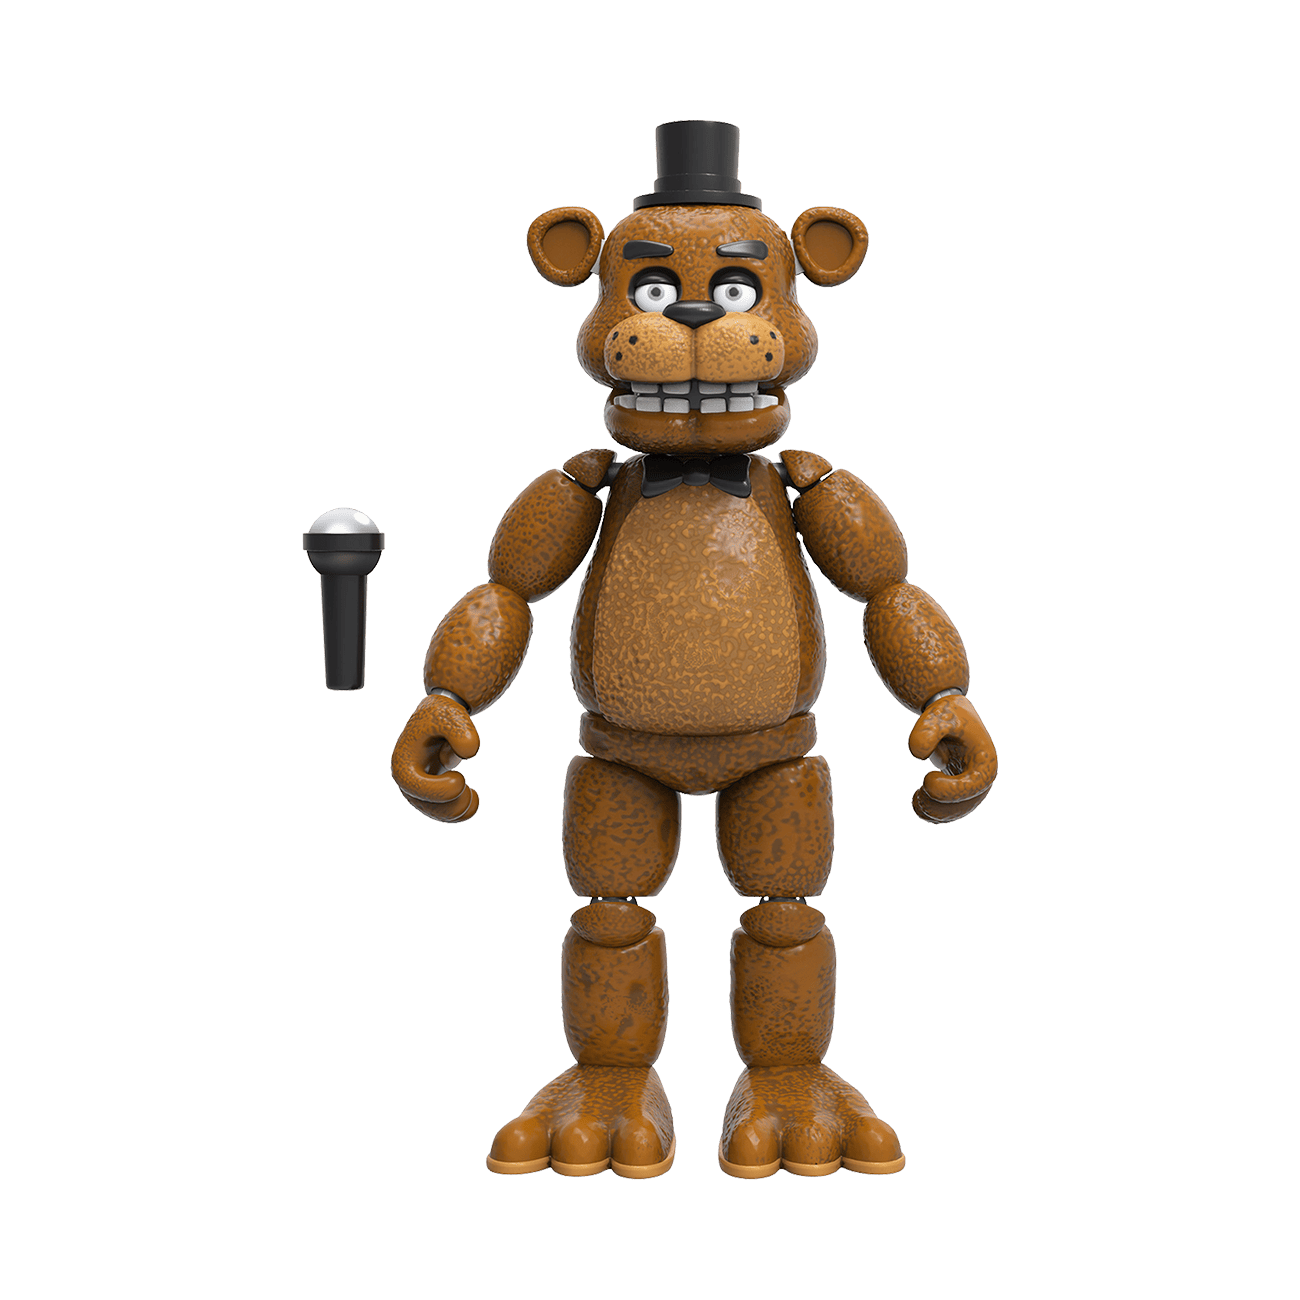 Buy Freddy Action Figure at Funko.